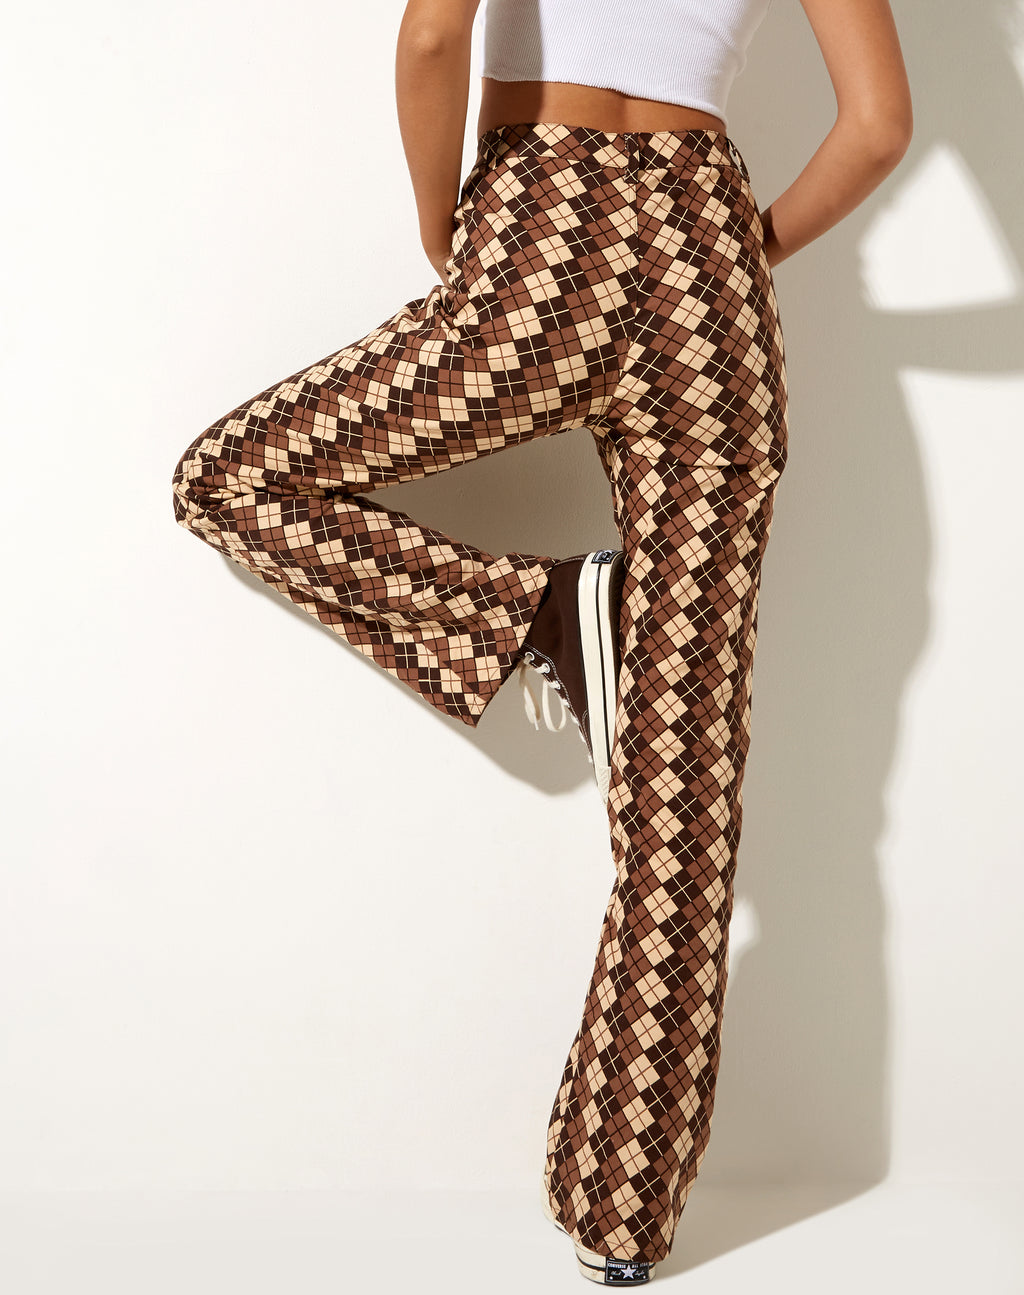 Zoven Flare Trouser in Argyle Brown